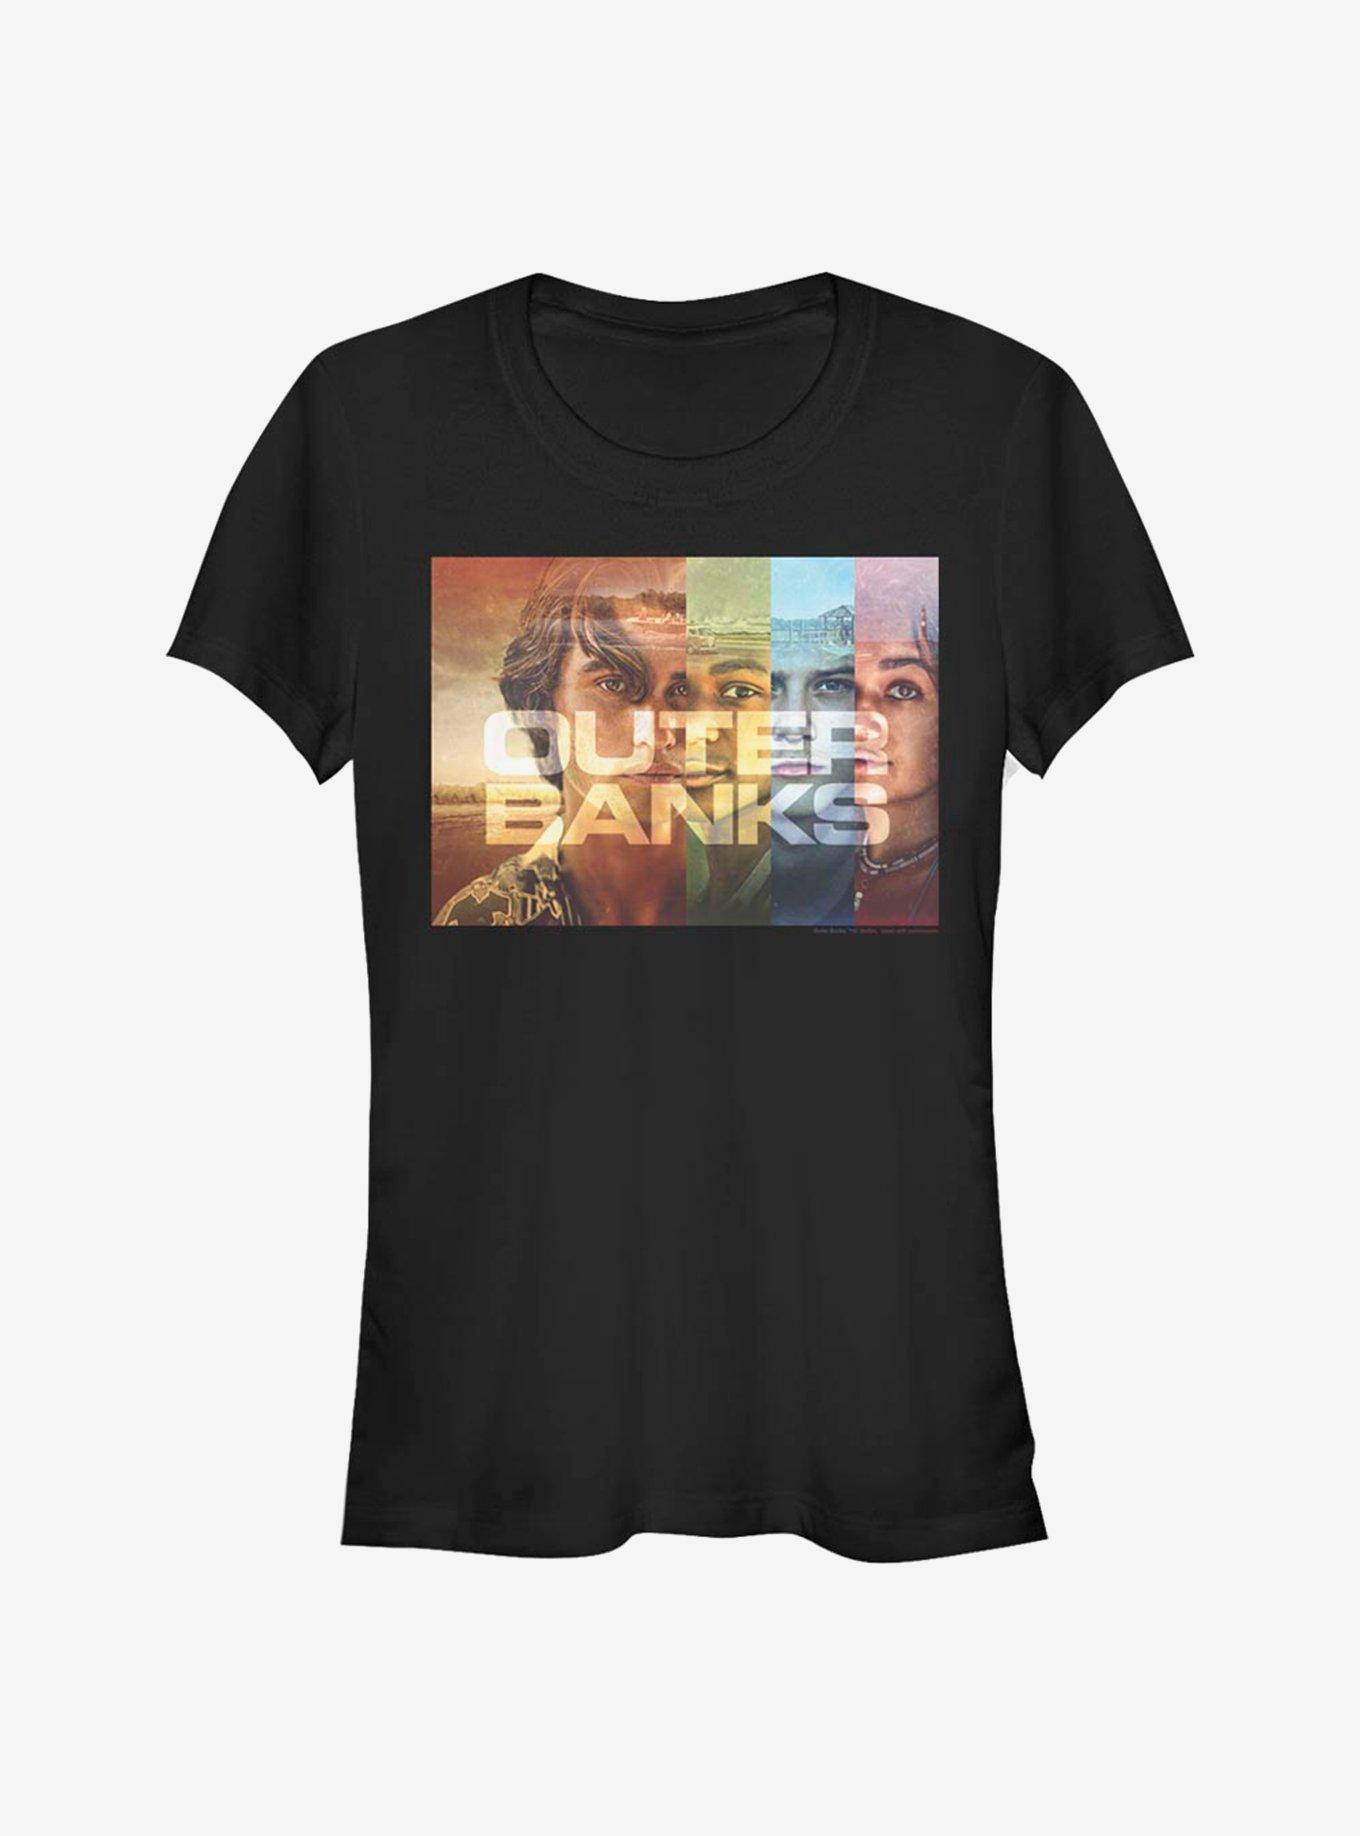 Outer Banks Poster Girls T-Shirt